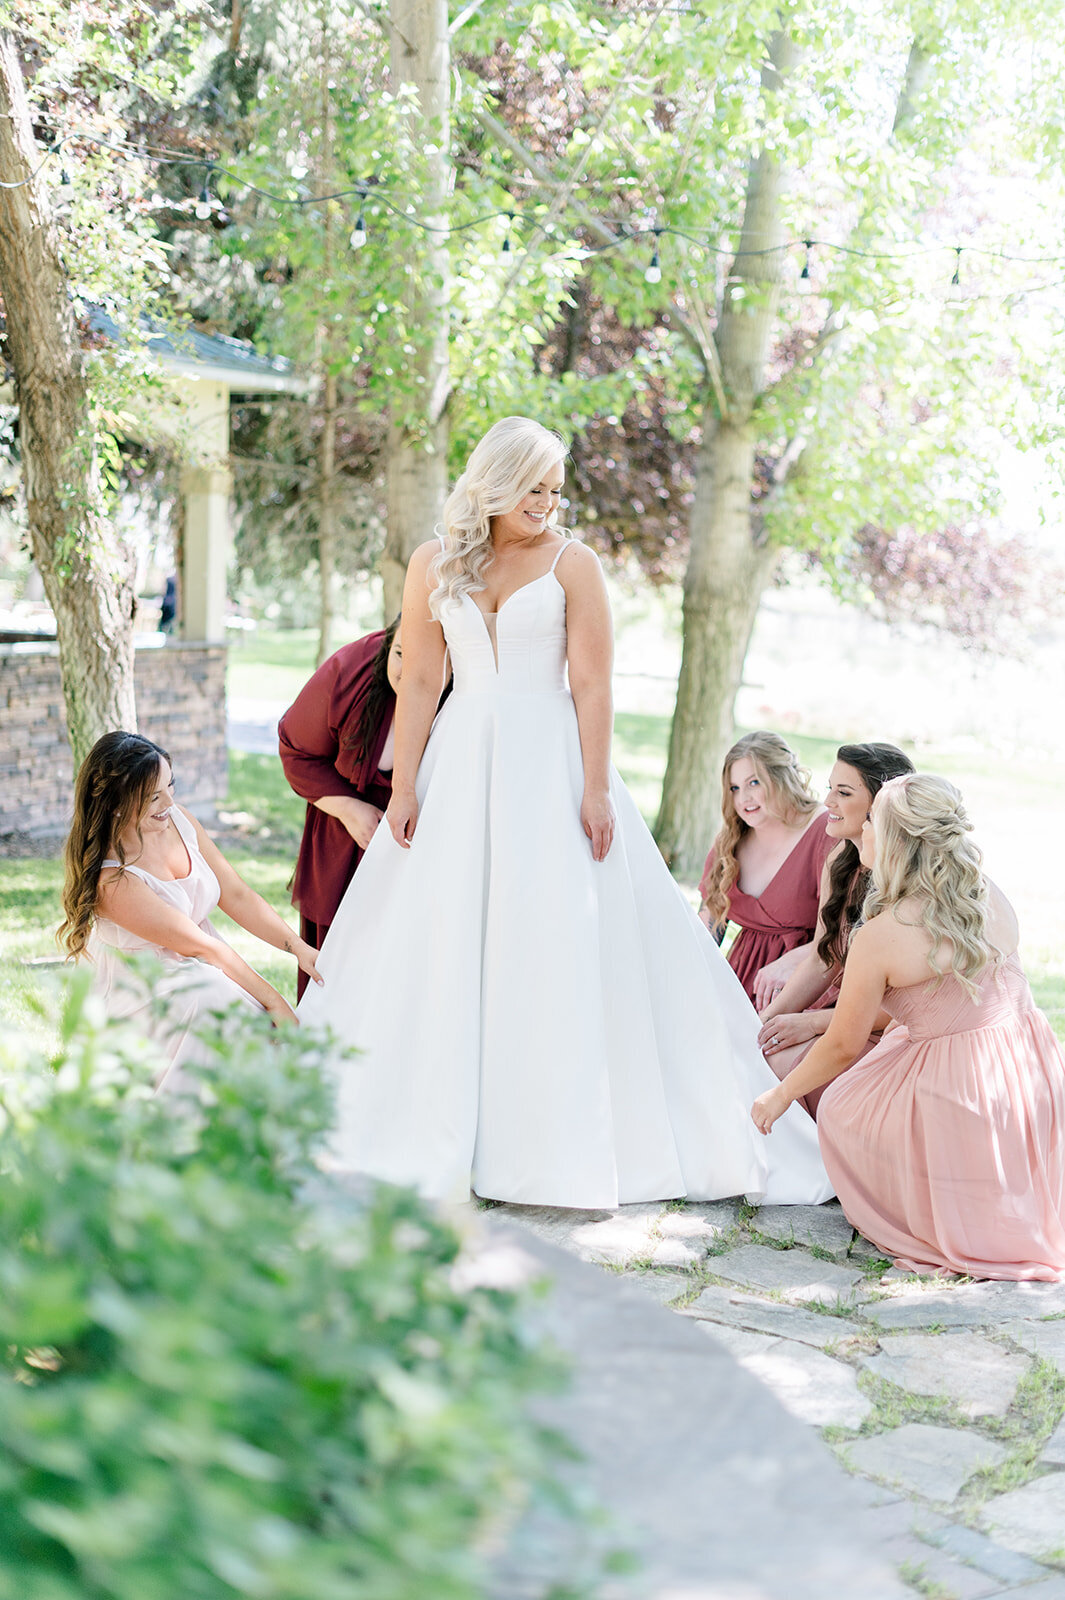 Bride getting ready with bridesmaids taken by the Best Boise Wedding Photographers